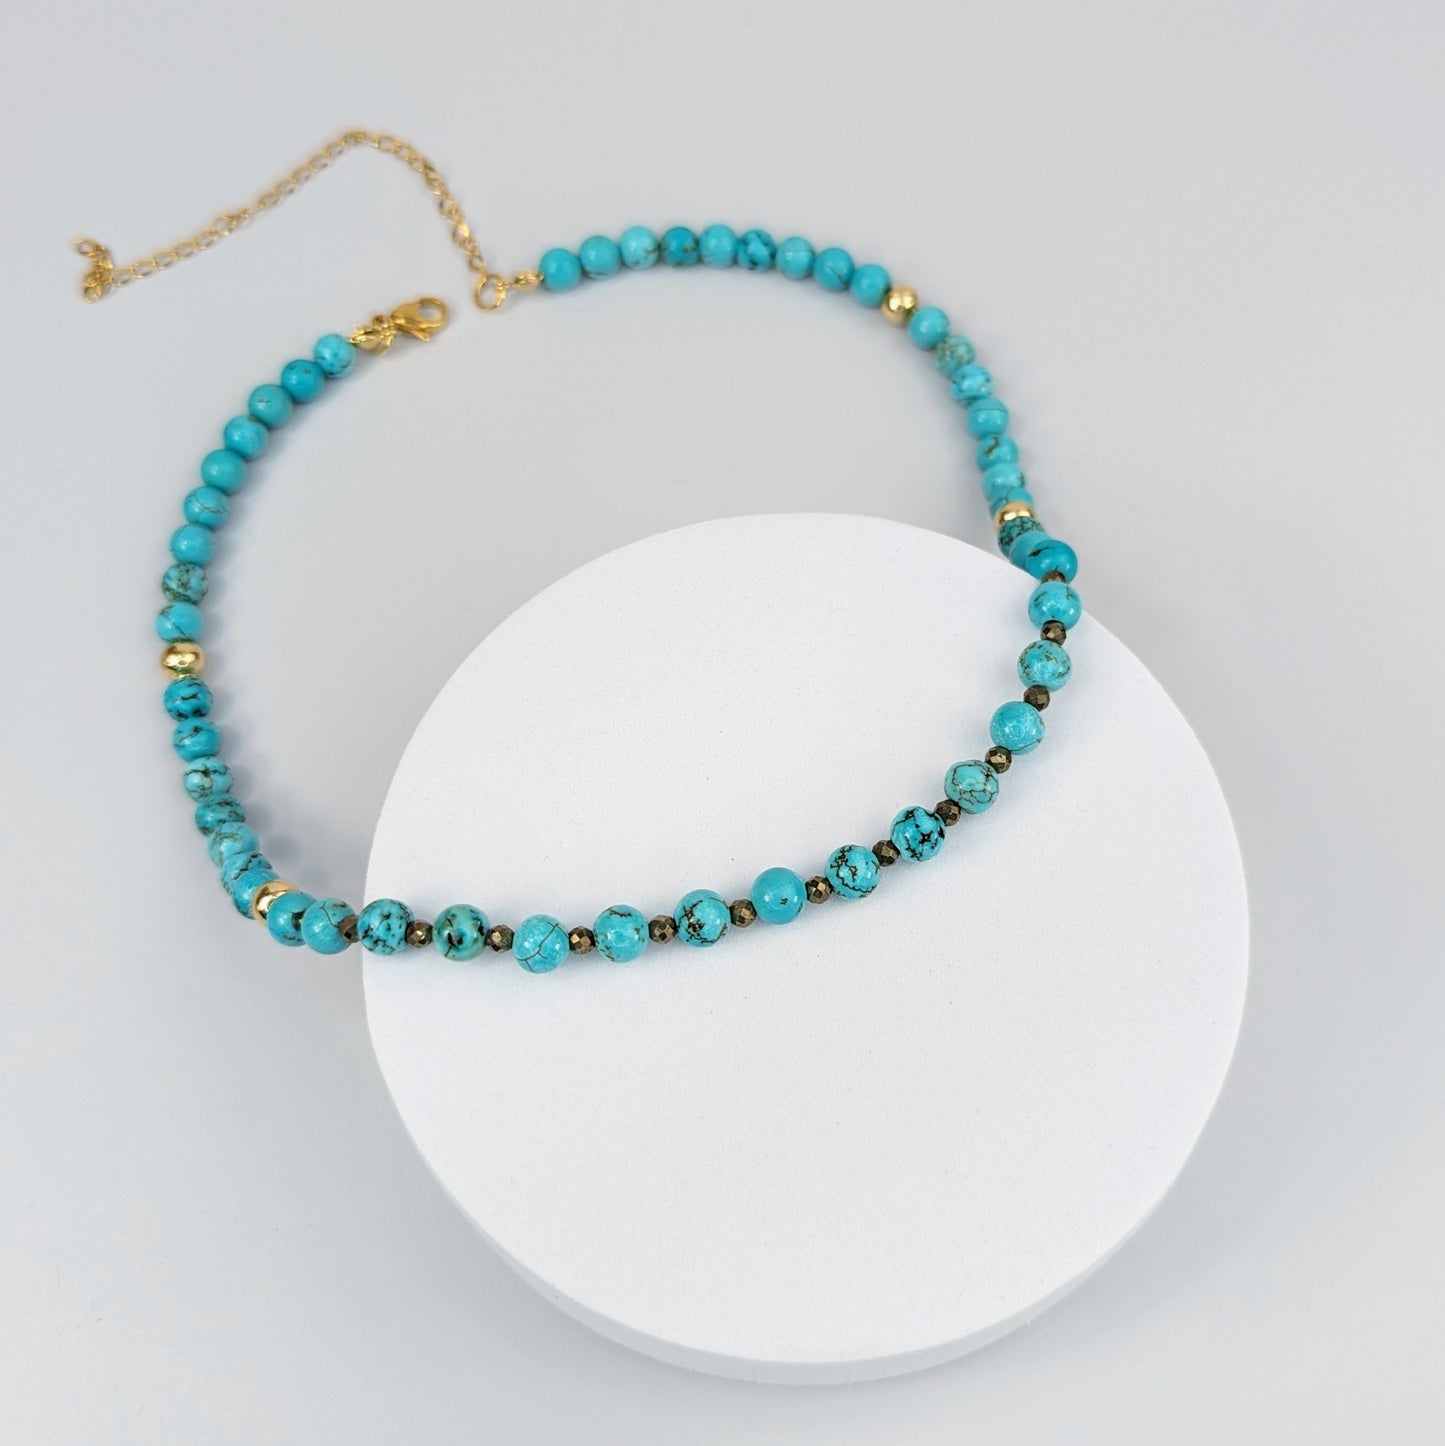 Turquoise Aurora Choker: Elegance with Pyrite Accents